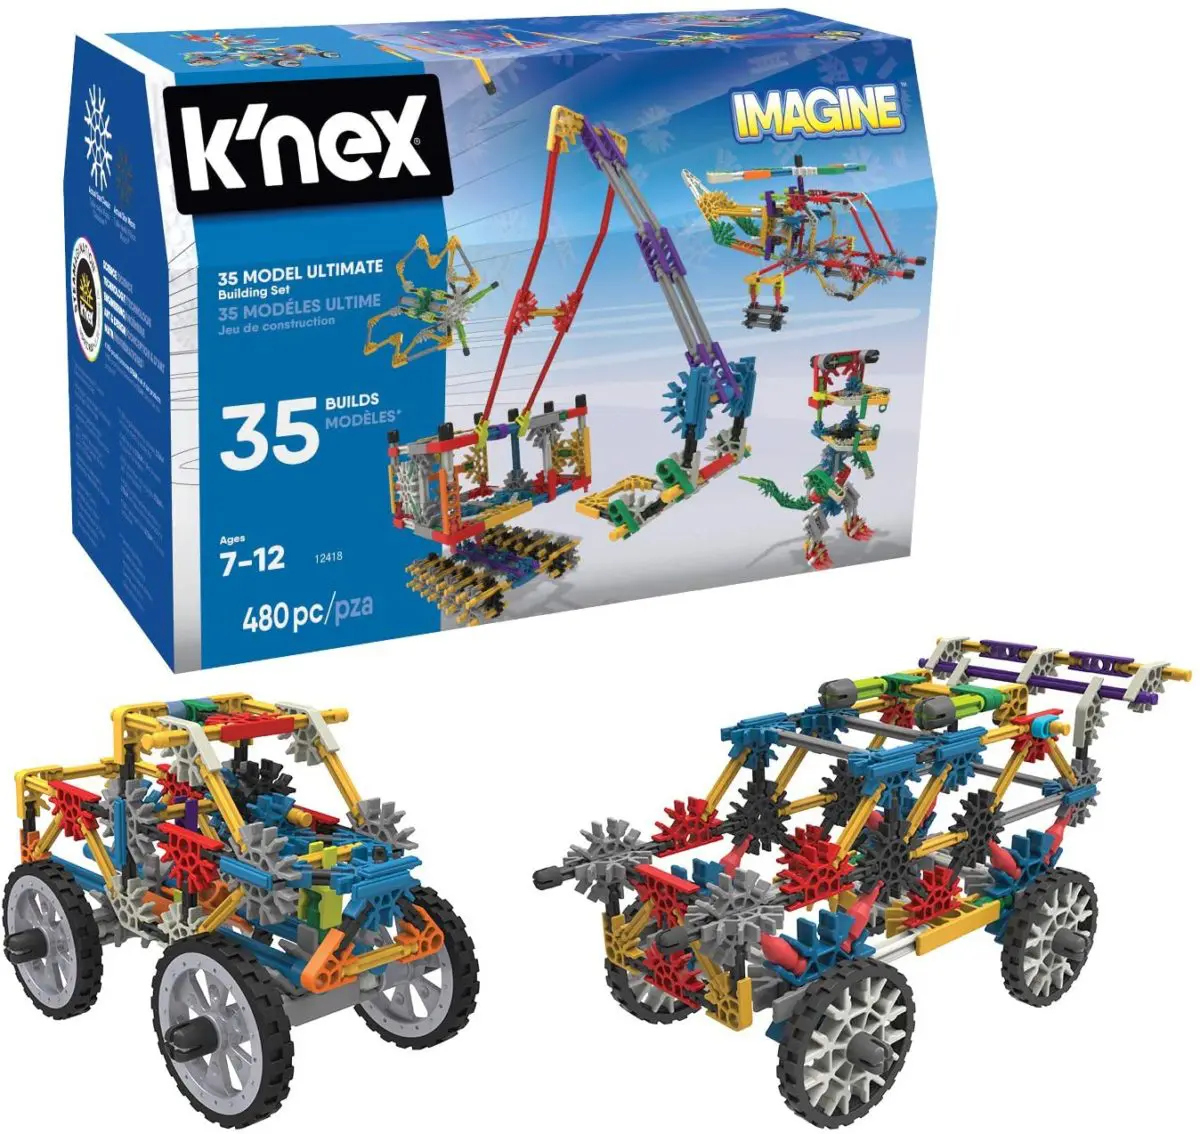 K’NEX 35 Model Building Set - Top Toys and Gifts for Nine Year Old Boys 1